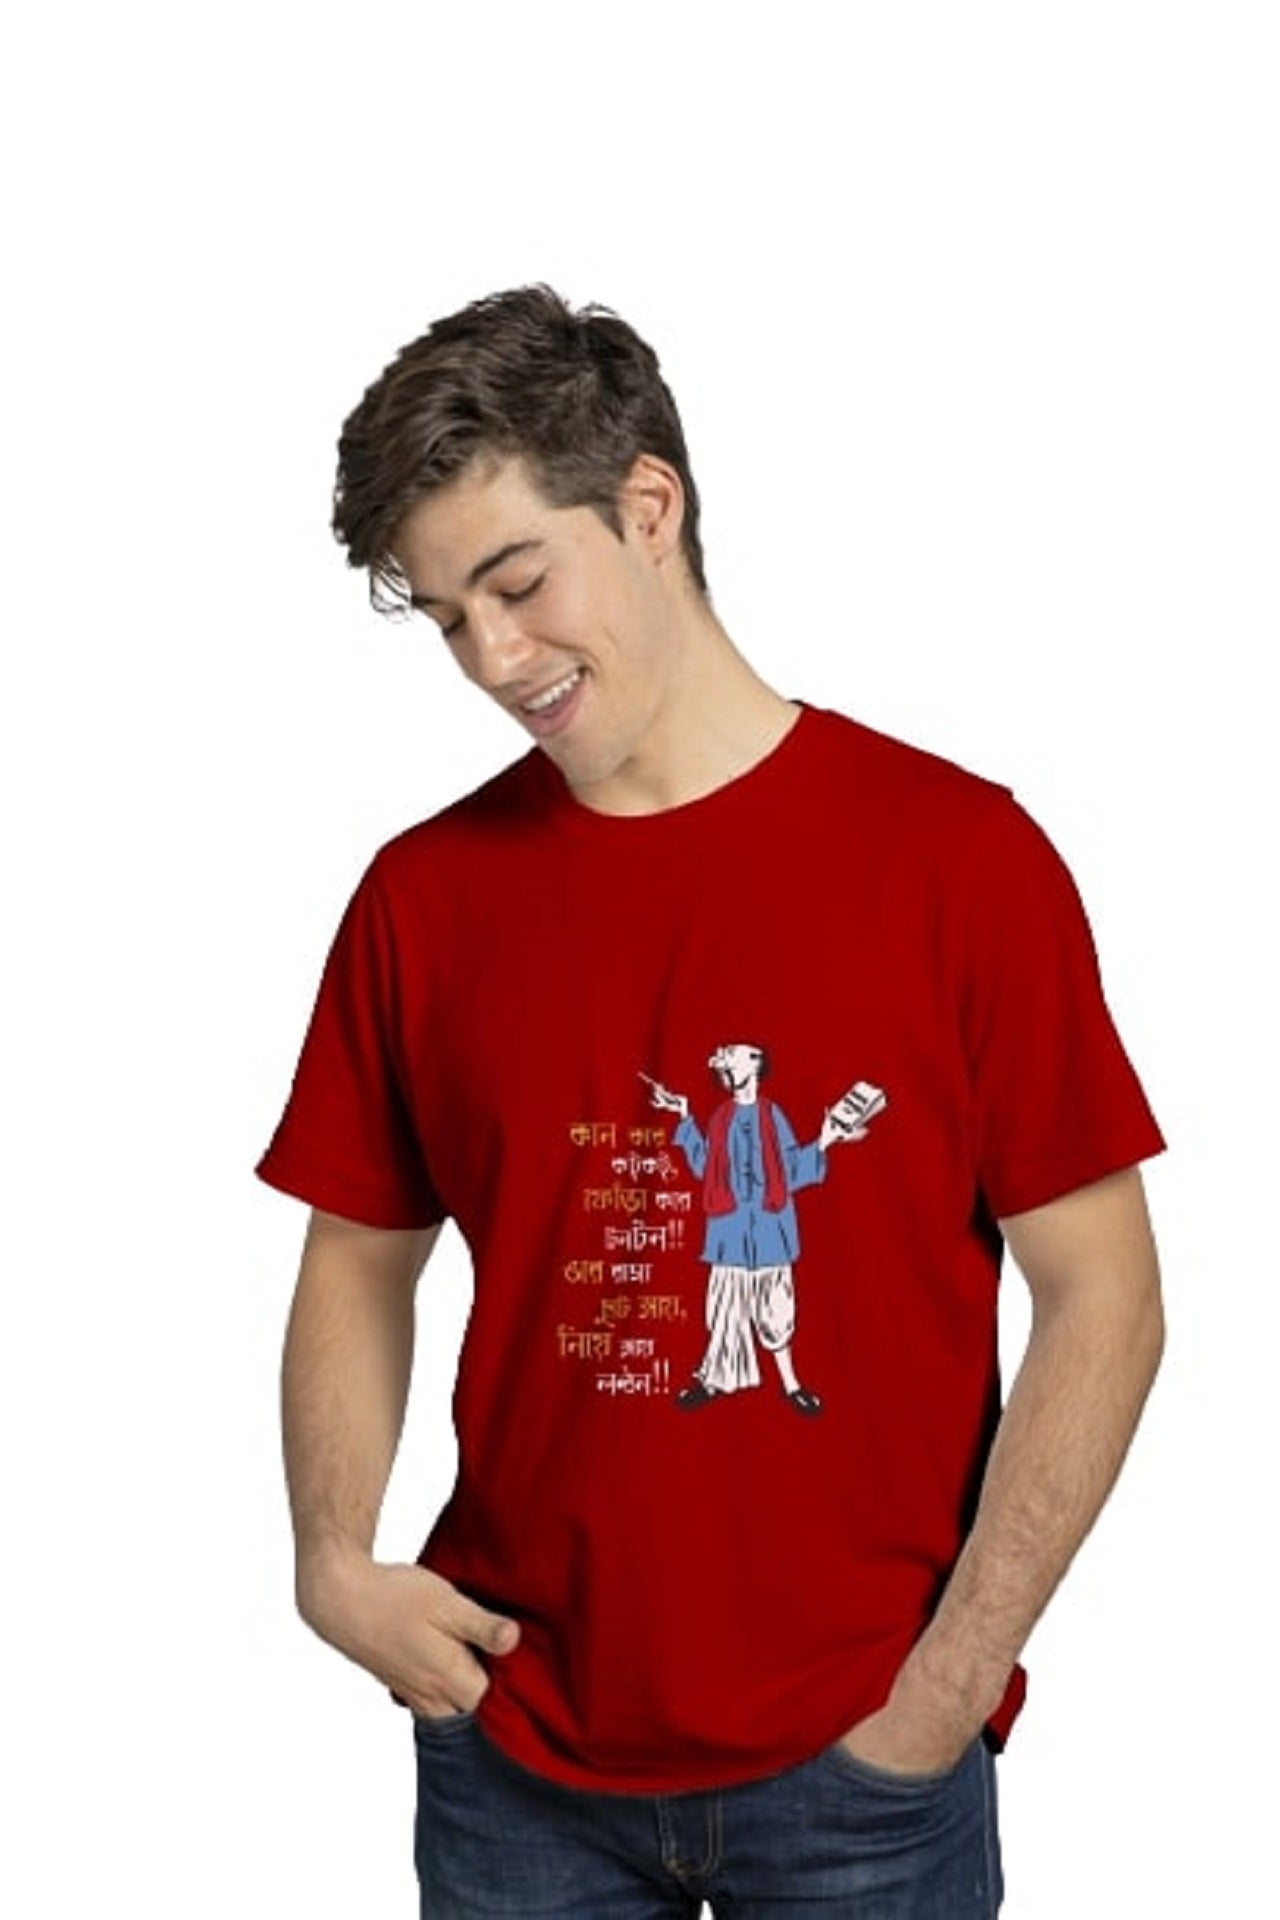 Funny Bengali captioned Tshirt for Kids